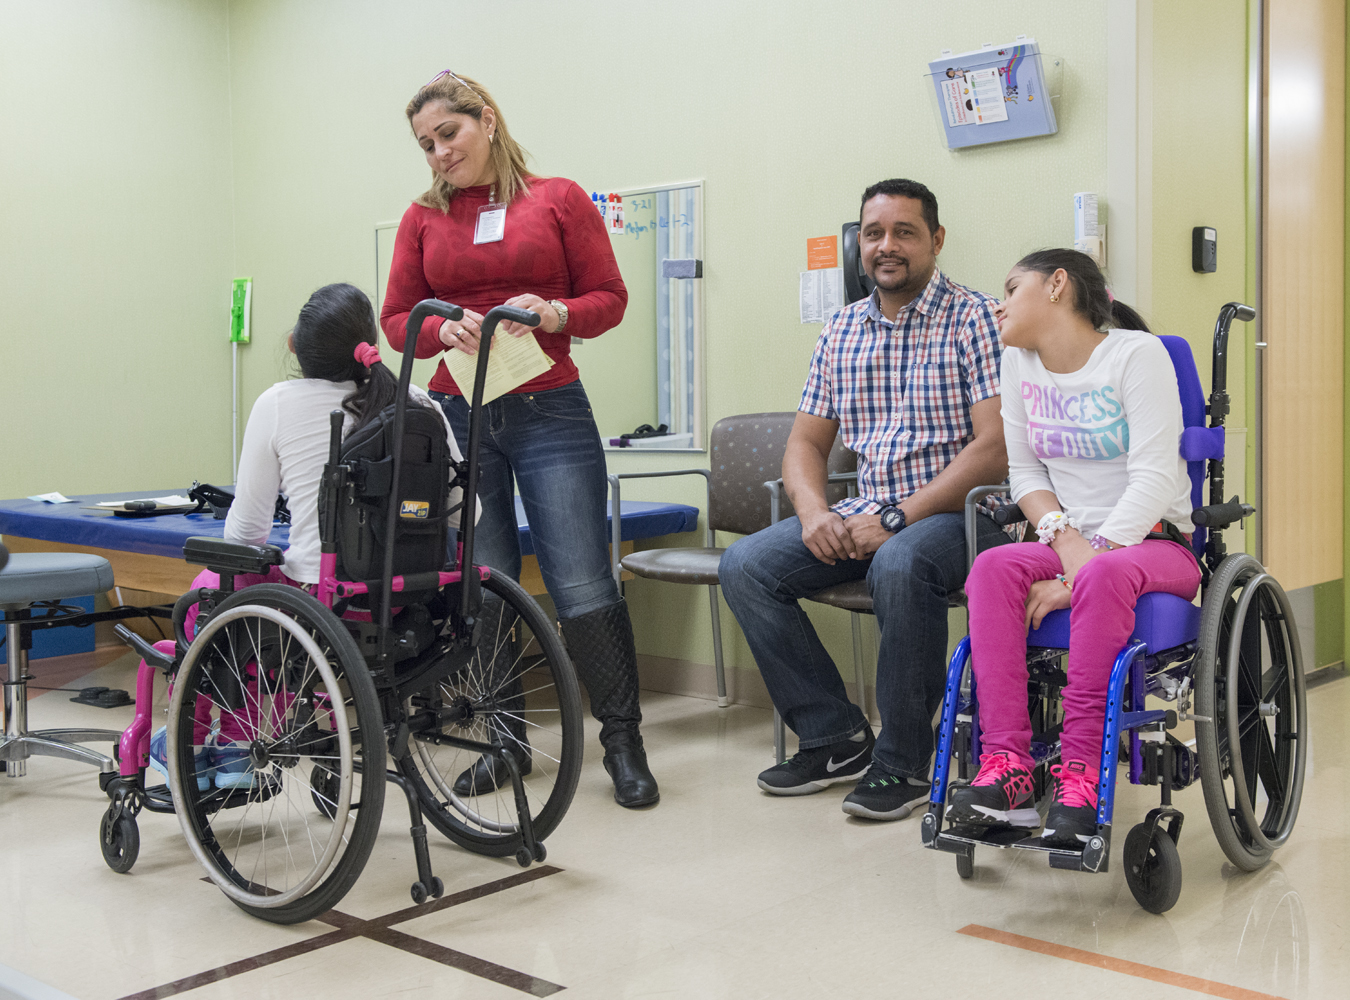 The Marias attend many physical therapy sessions at Gillette Children's Specialty Healthcare.